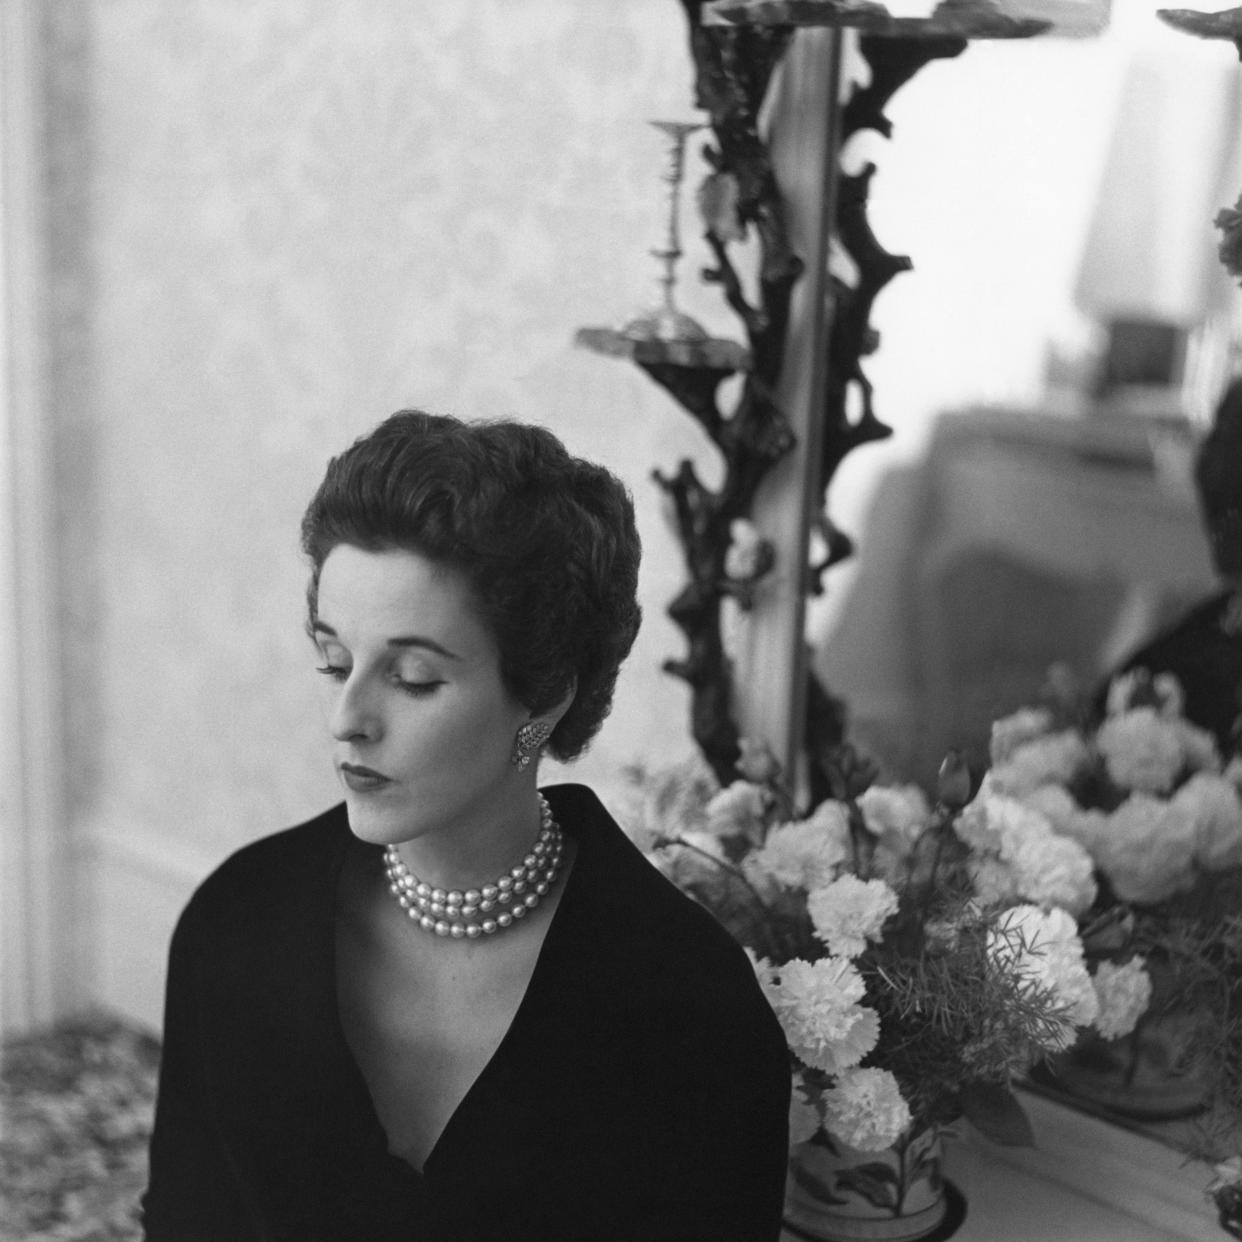 Newlywed Babe Paley in her bedroom at Kiluna Farm, Manhasset, New York, 1948.